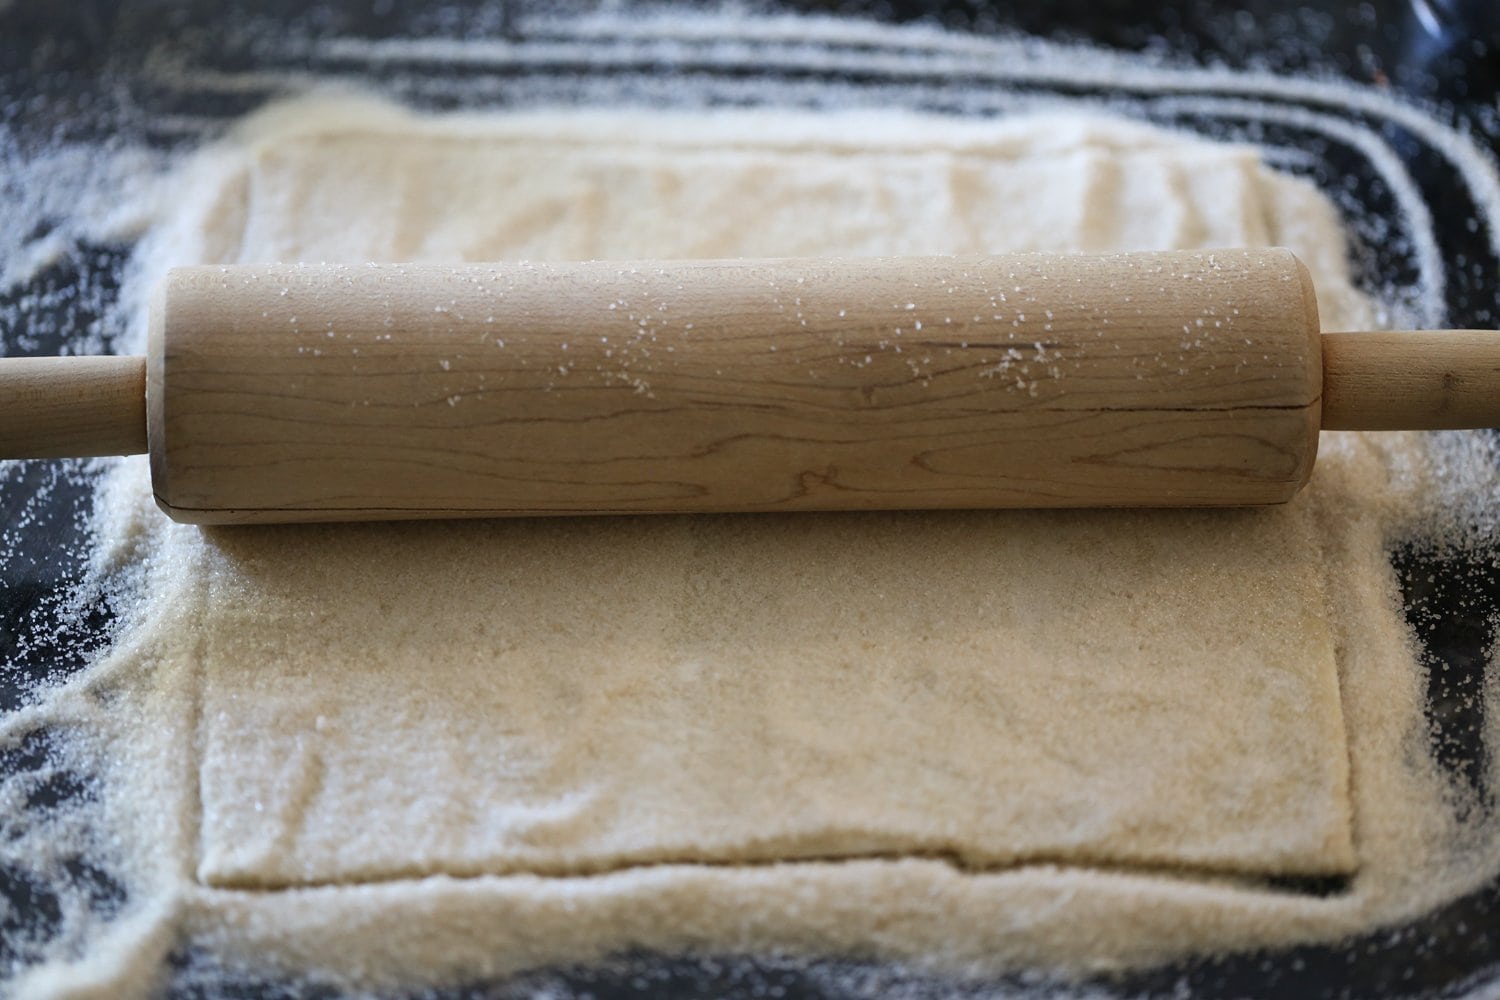 Folding Palmiers Dough Step 4: A rolling pin is used to roll out the pastry dough coated in sugar.